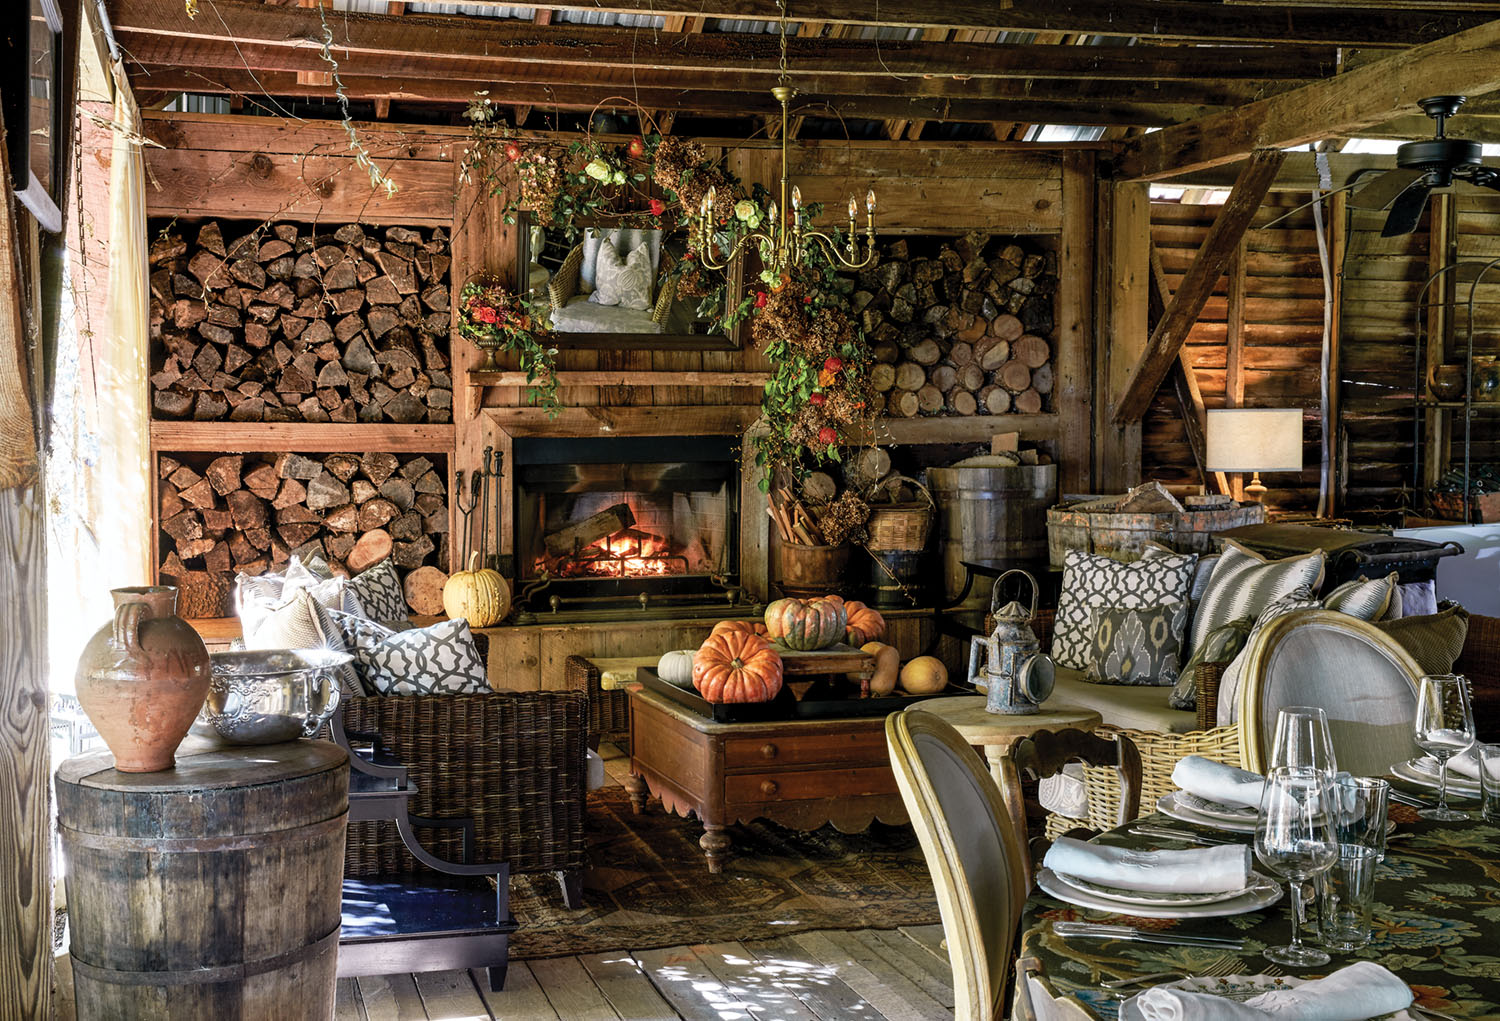 At Keith Robinson's home at Redwine Plantation, a large room with barnwood walls, floors, and ceilings. Ample firewood is stored in cubbies surrounding the hearth. Autumn floral arrangements, garlands, and pumpkins decorate the hearth and comfortable seating area.